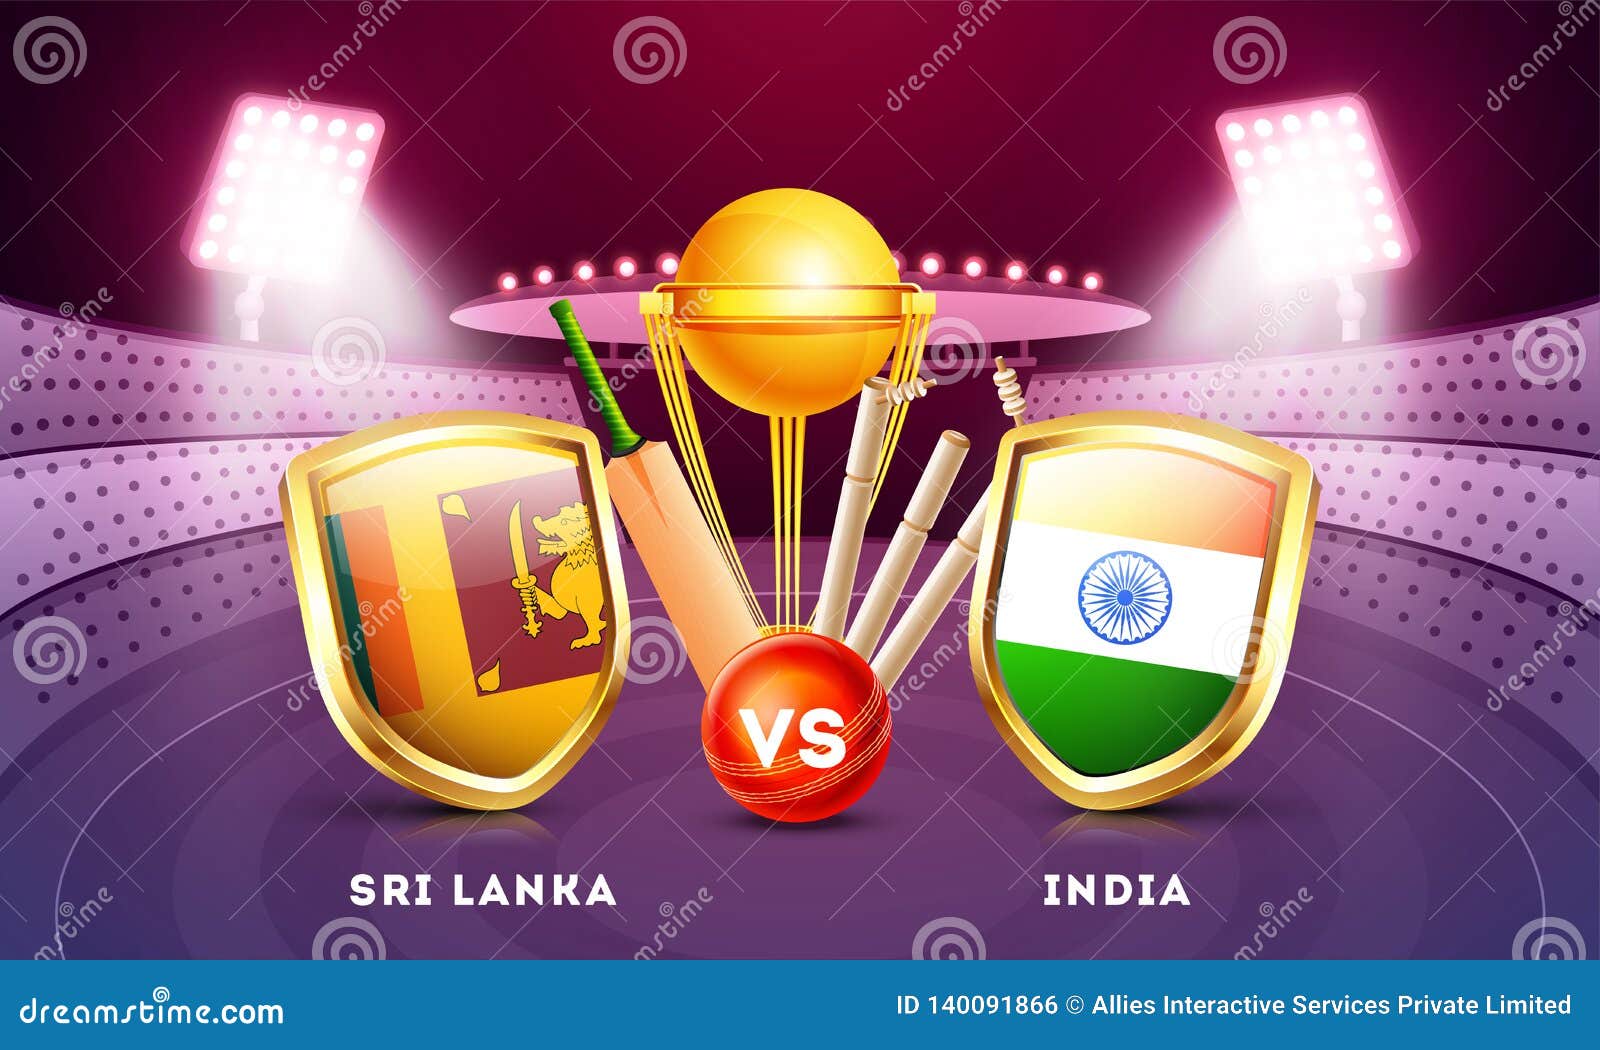 Advertising Banner Or Poster Design With Cricket Tournament Participant Country Sri Lanka Vs India Stock Illustration Illustration Of Cricketer Entertainment 140091866